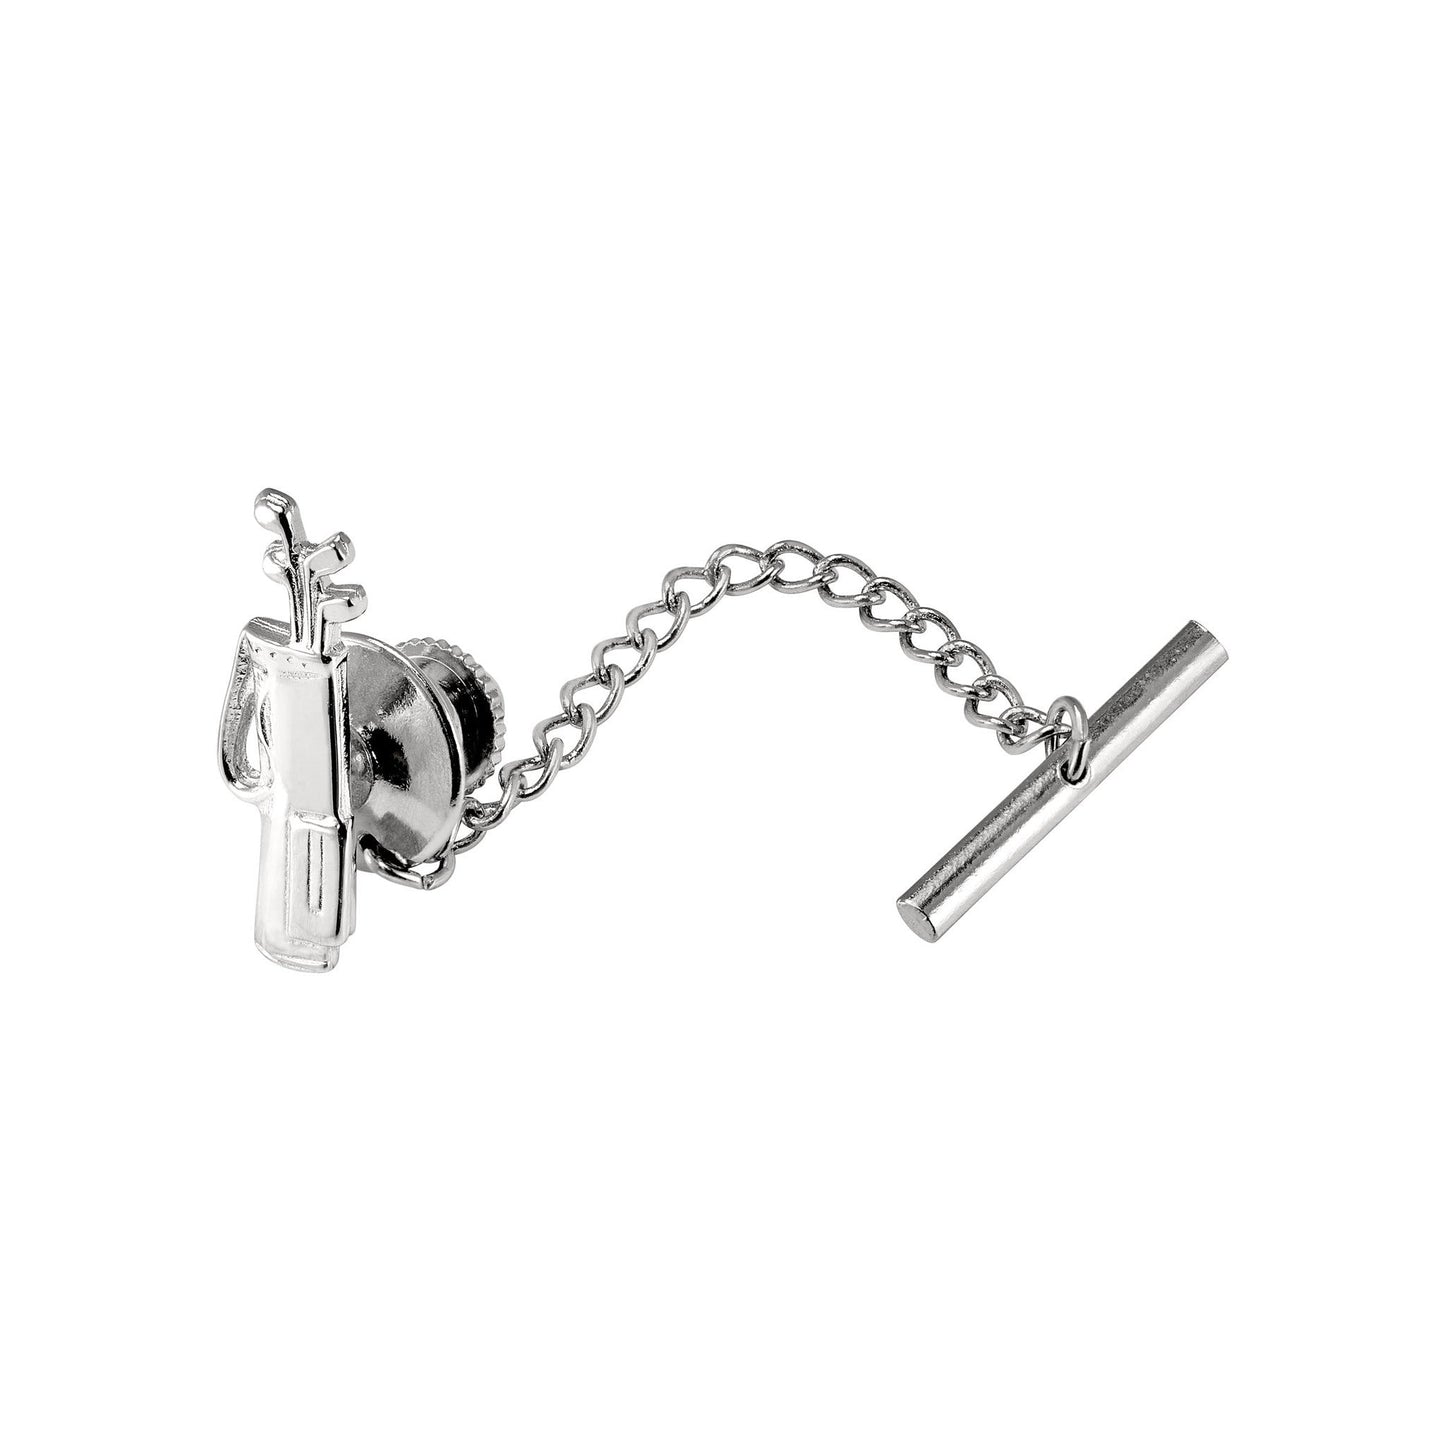 A sterling silver golf bag tie tack displayed on a neutral white background.